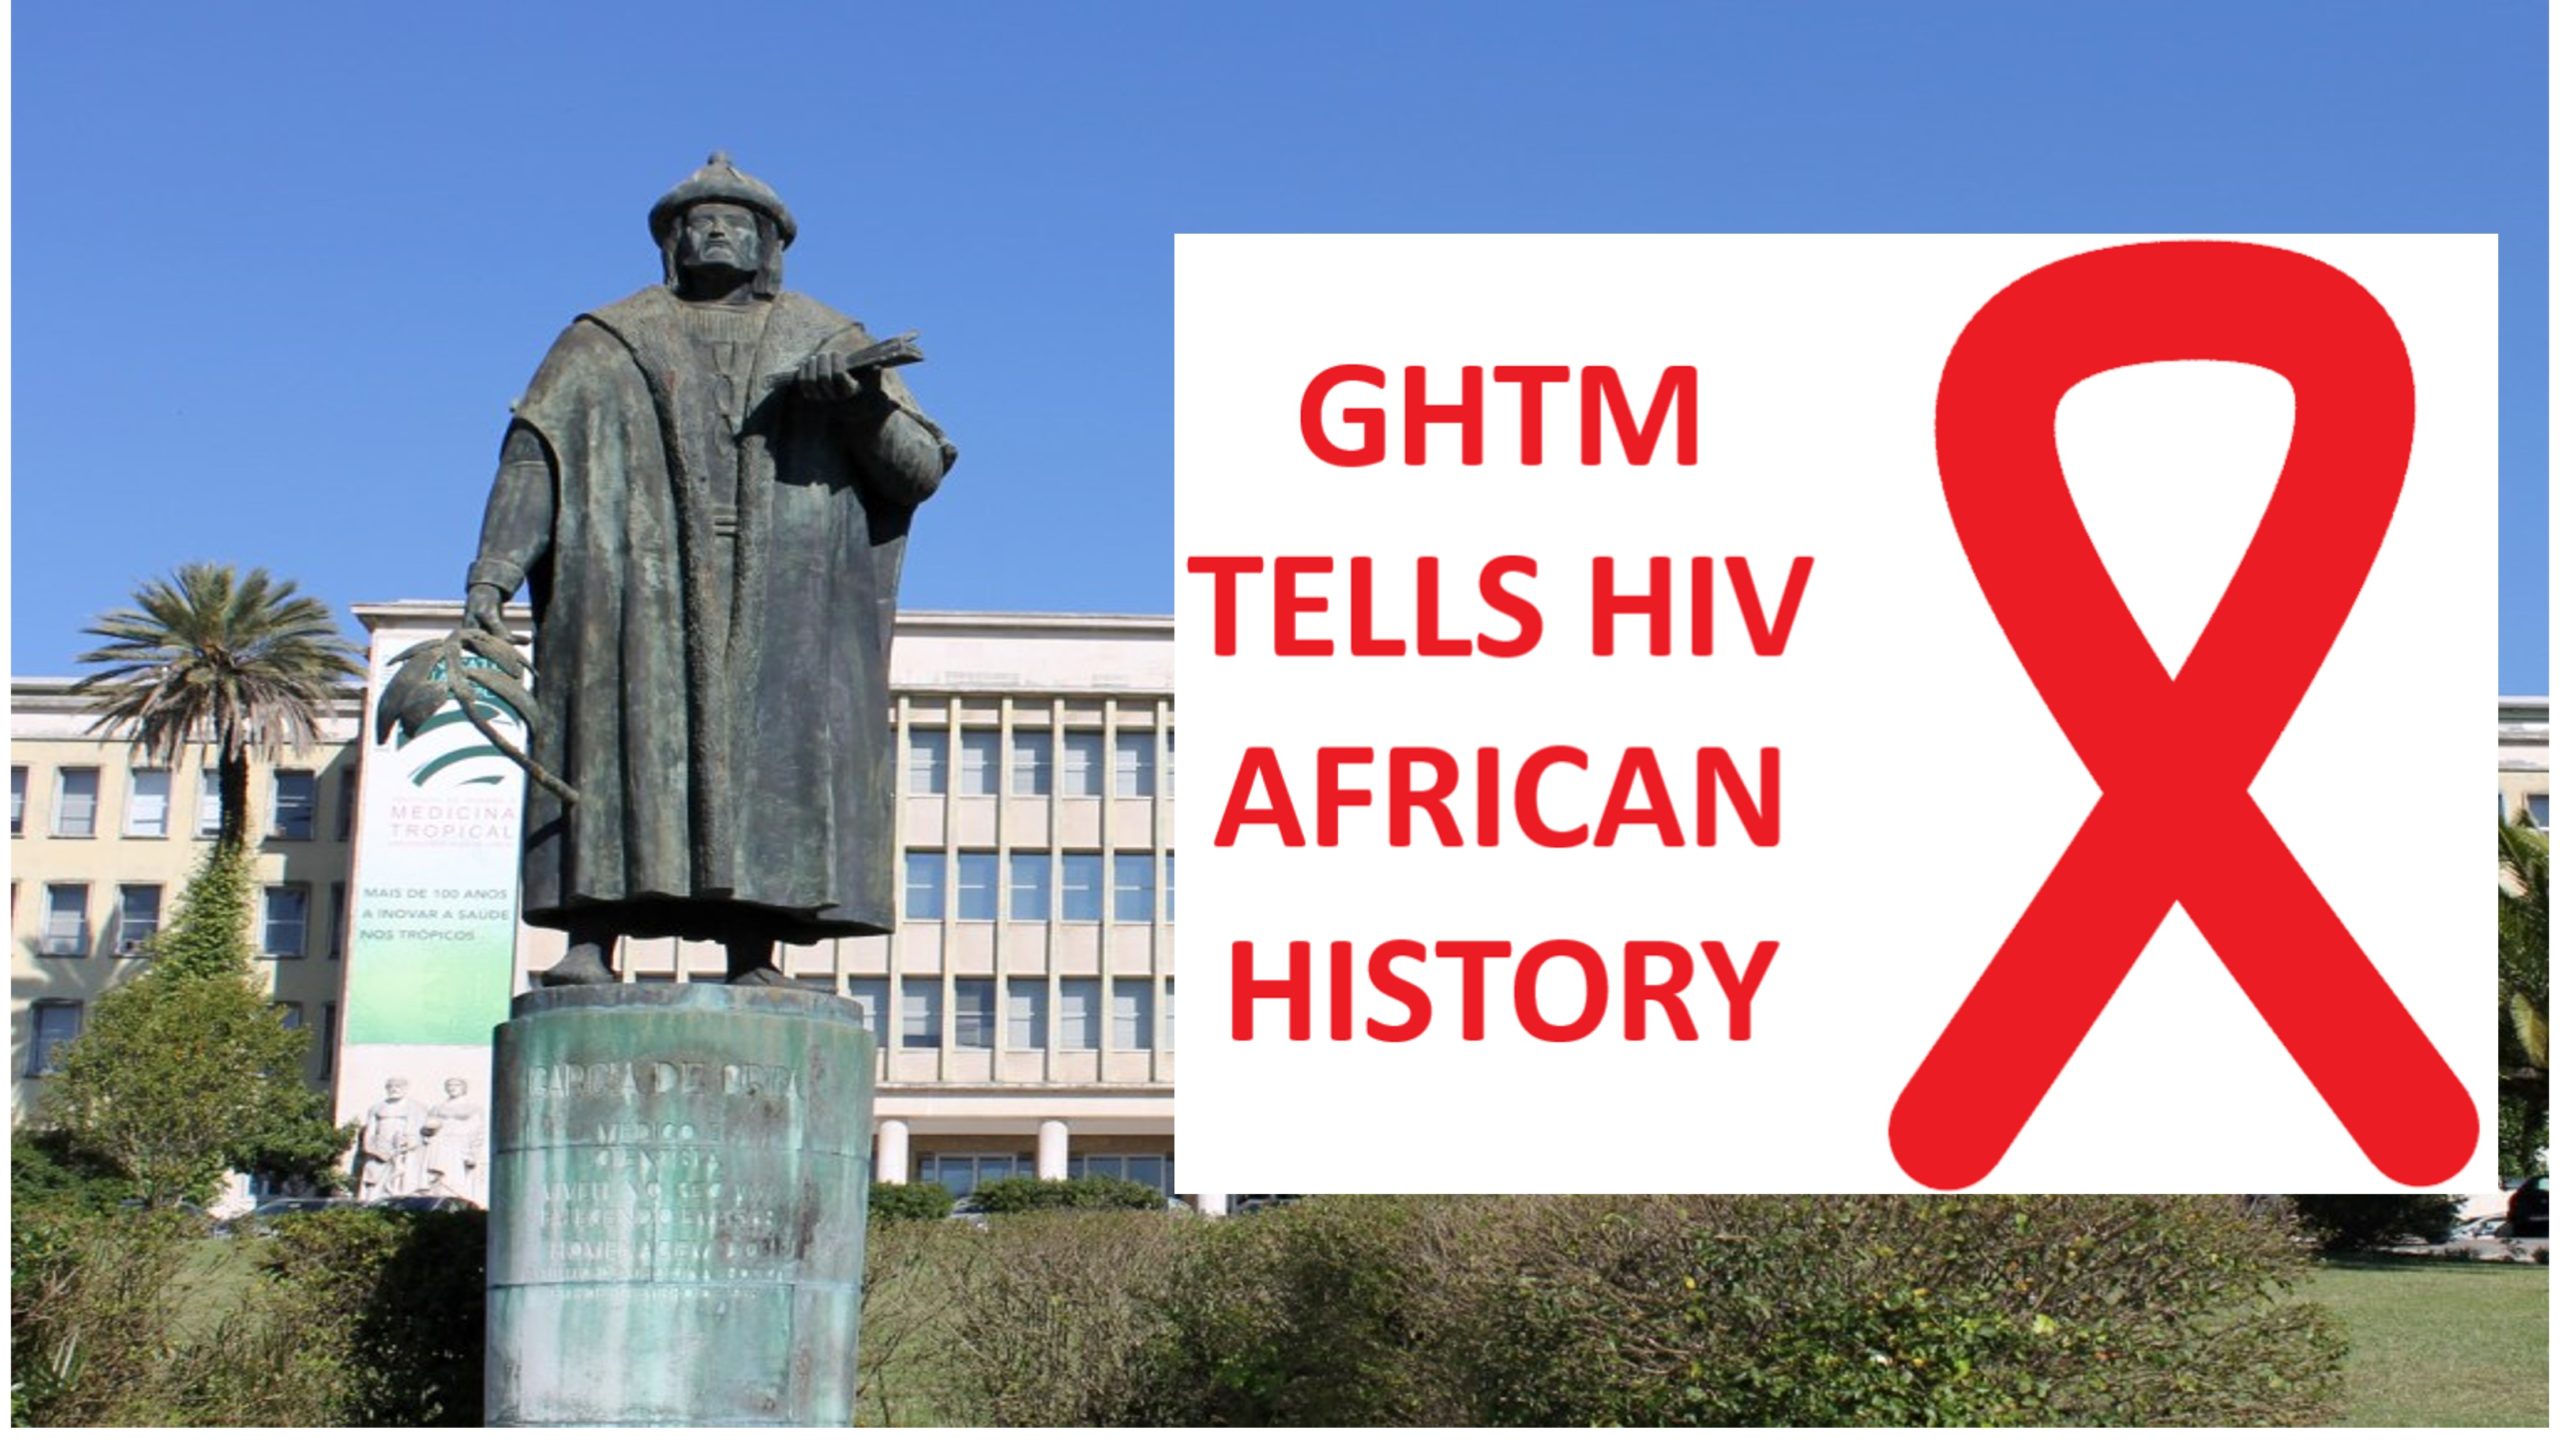 GHTM HIV